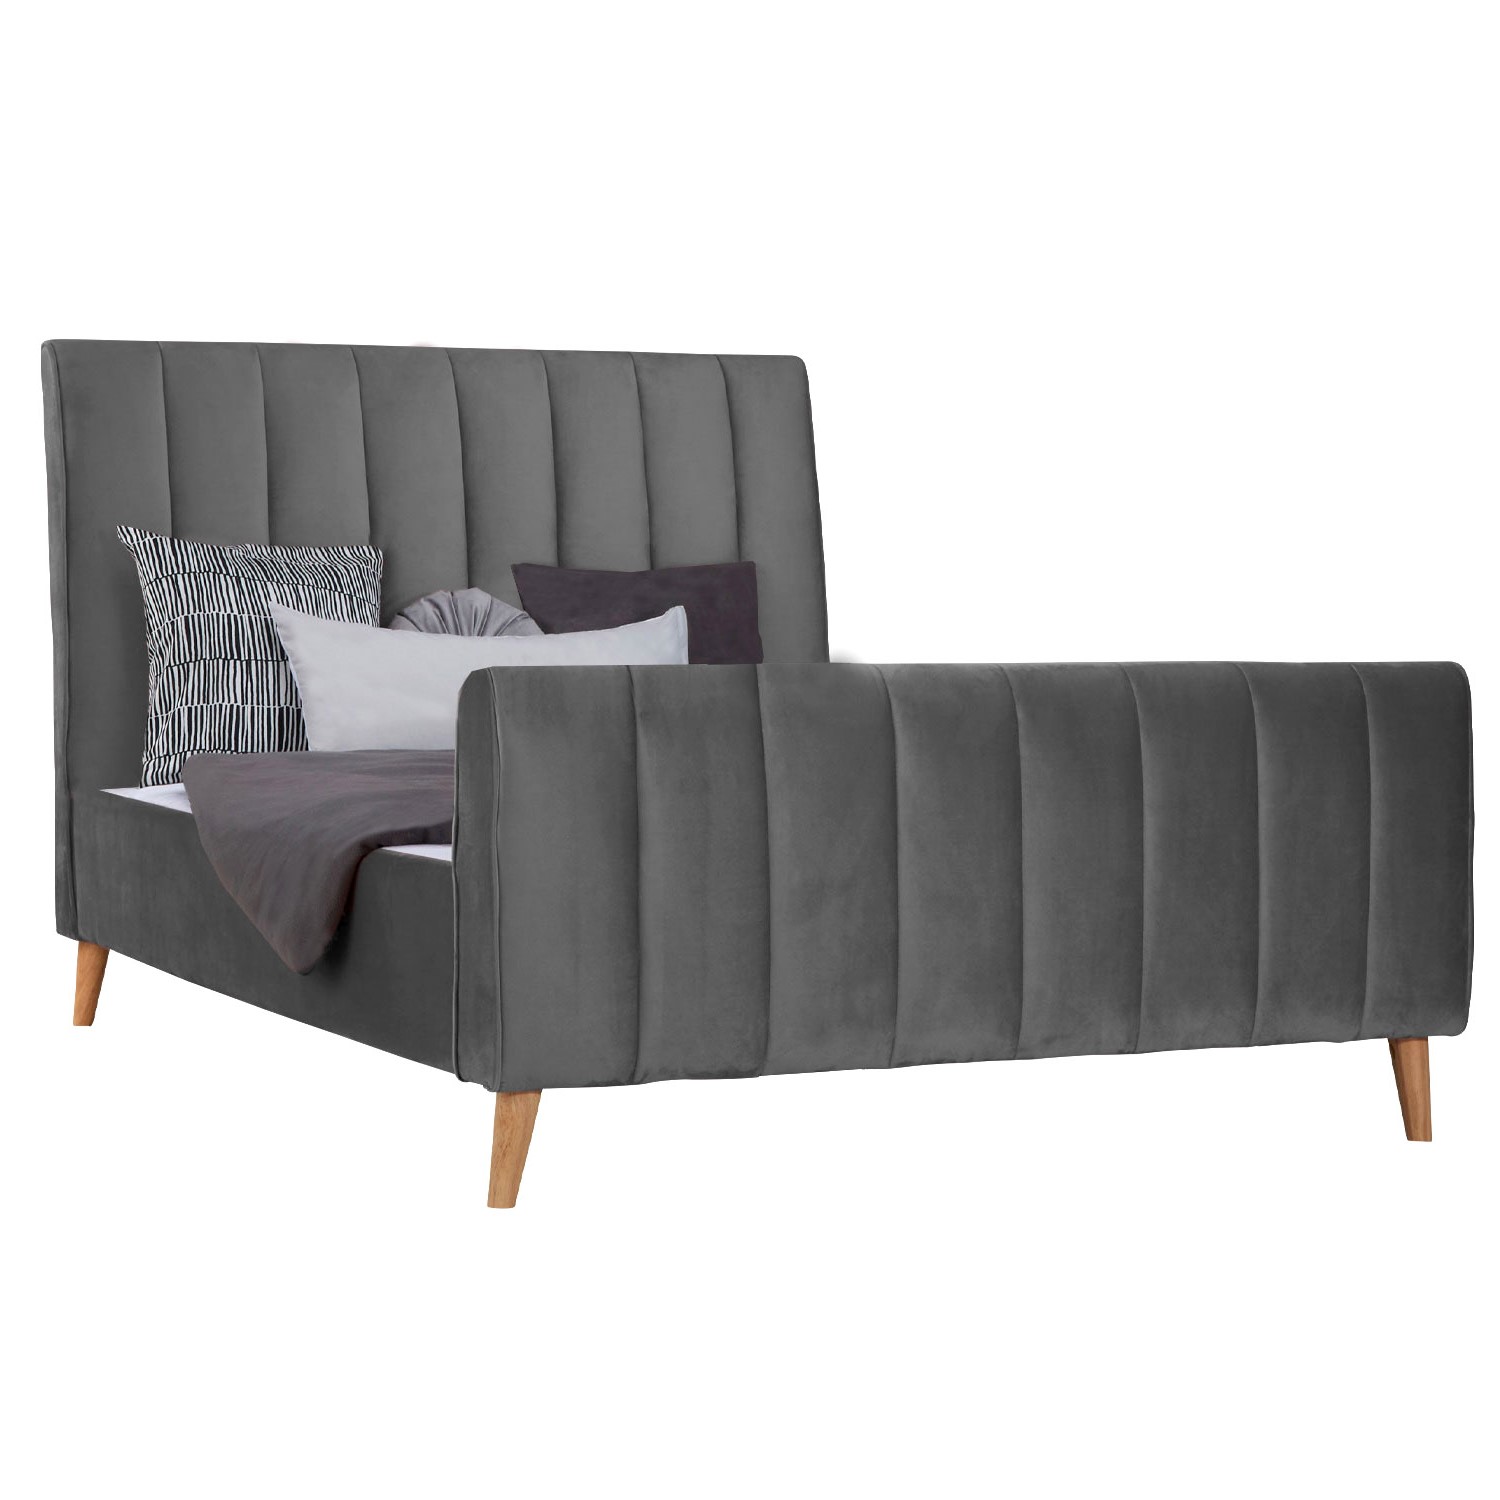 Upholstered Bed Velvet Pink Grey 140 x 200  cm with Slatted Frame Double Bed Fabric Bedstead 